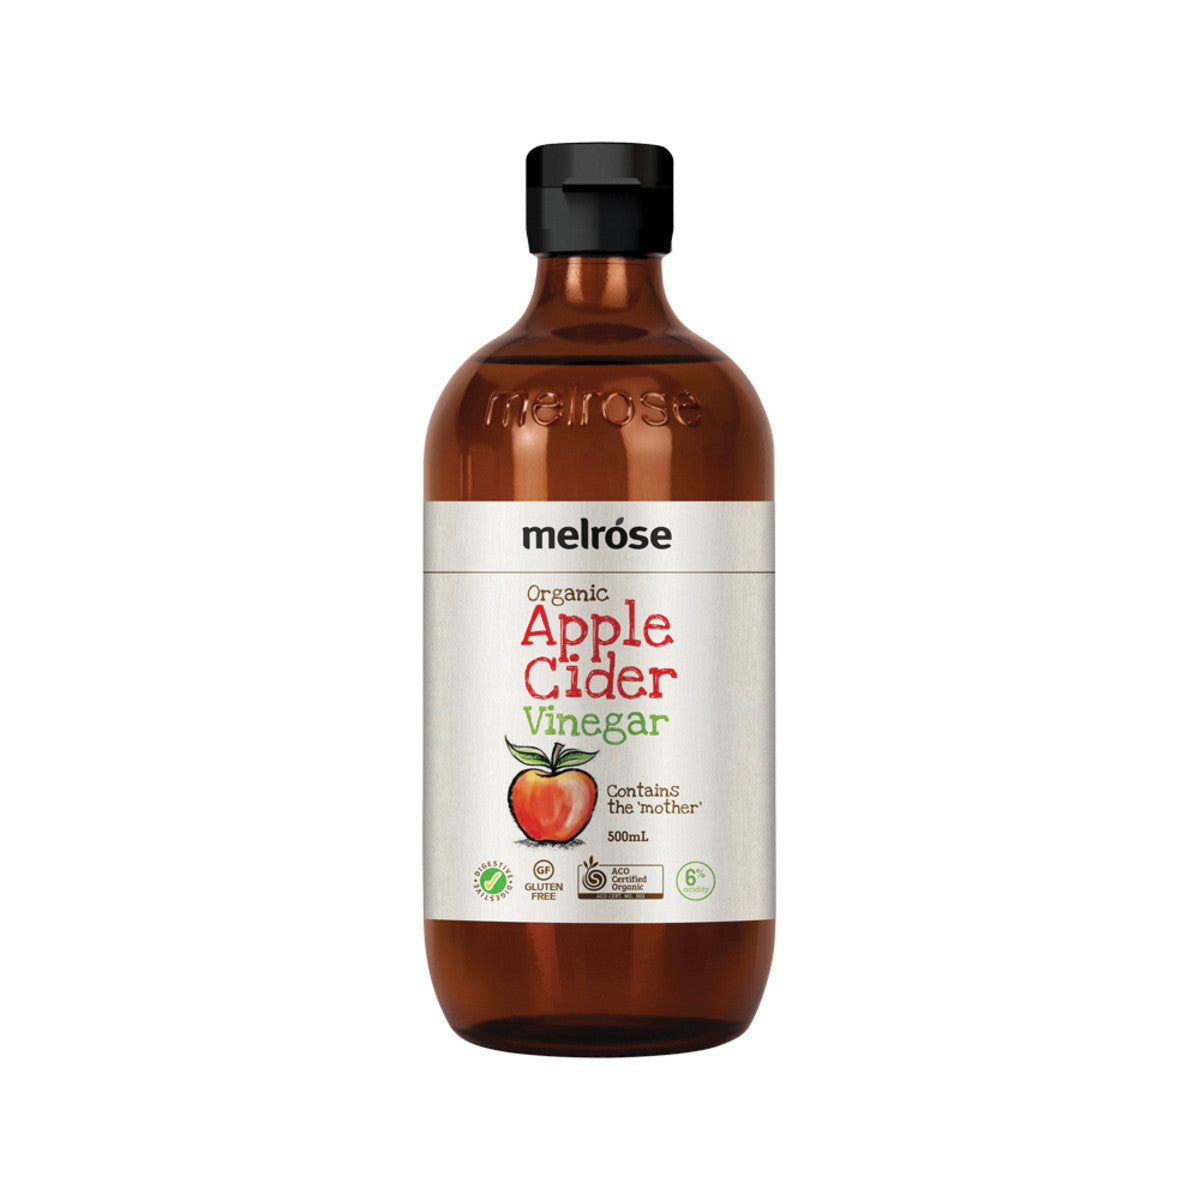 Melrose Organic Apple Cider Vinegar (contains the 'mother') 500ml-The Living Co.